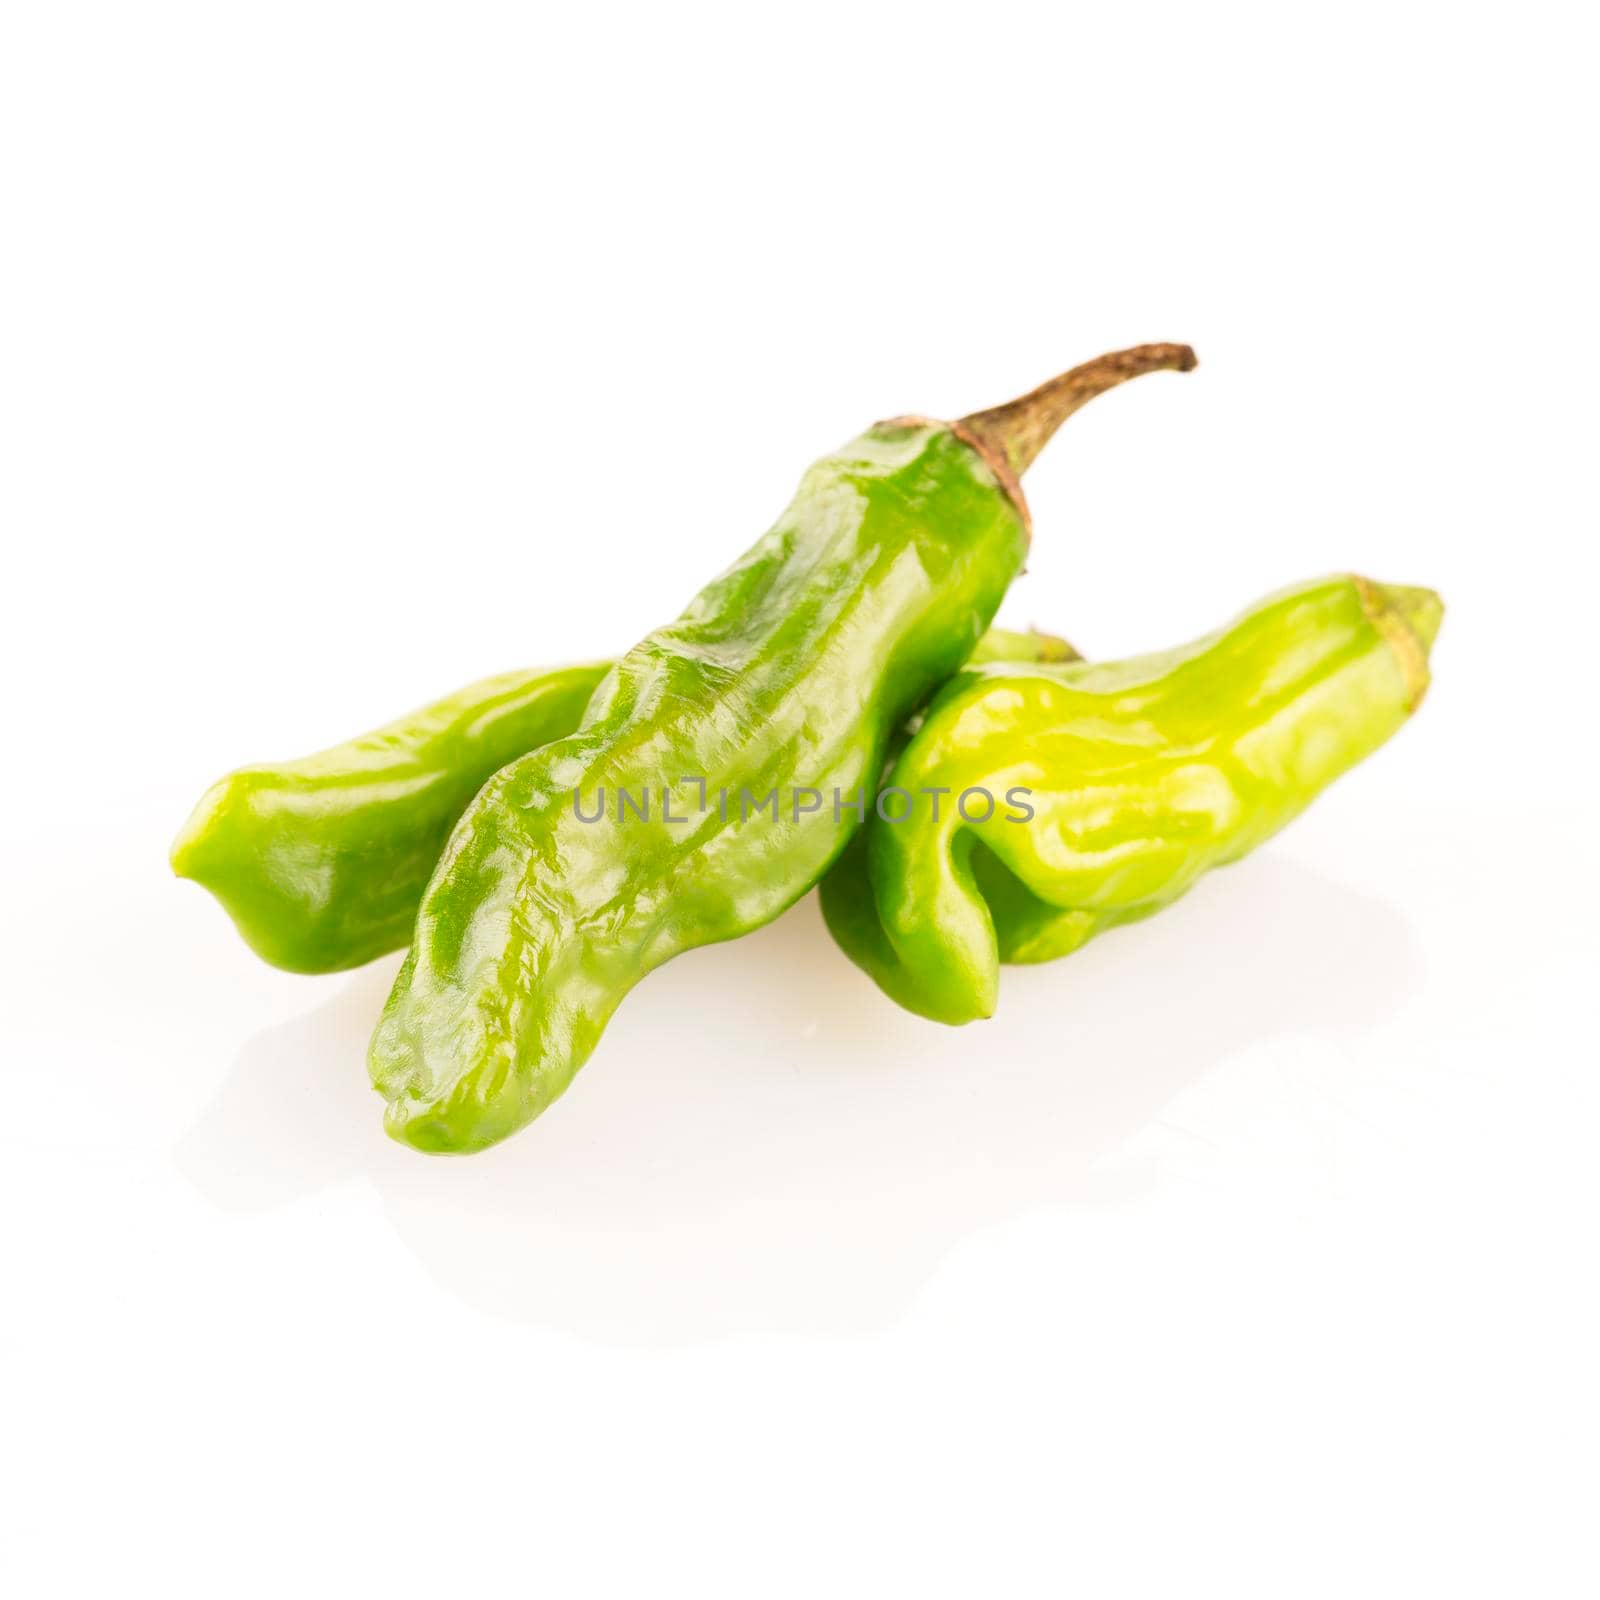 Shishito peppers isolated on a white background with shadow.